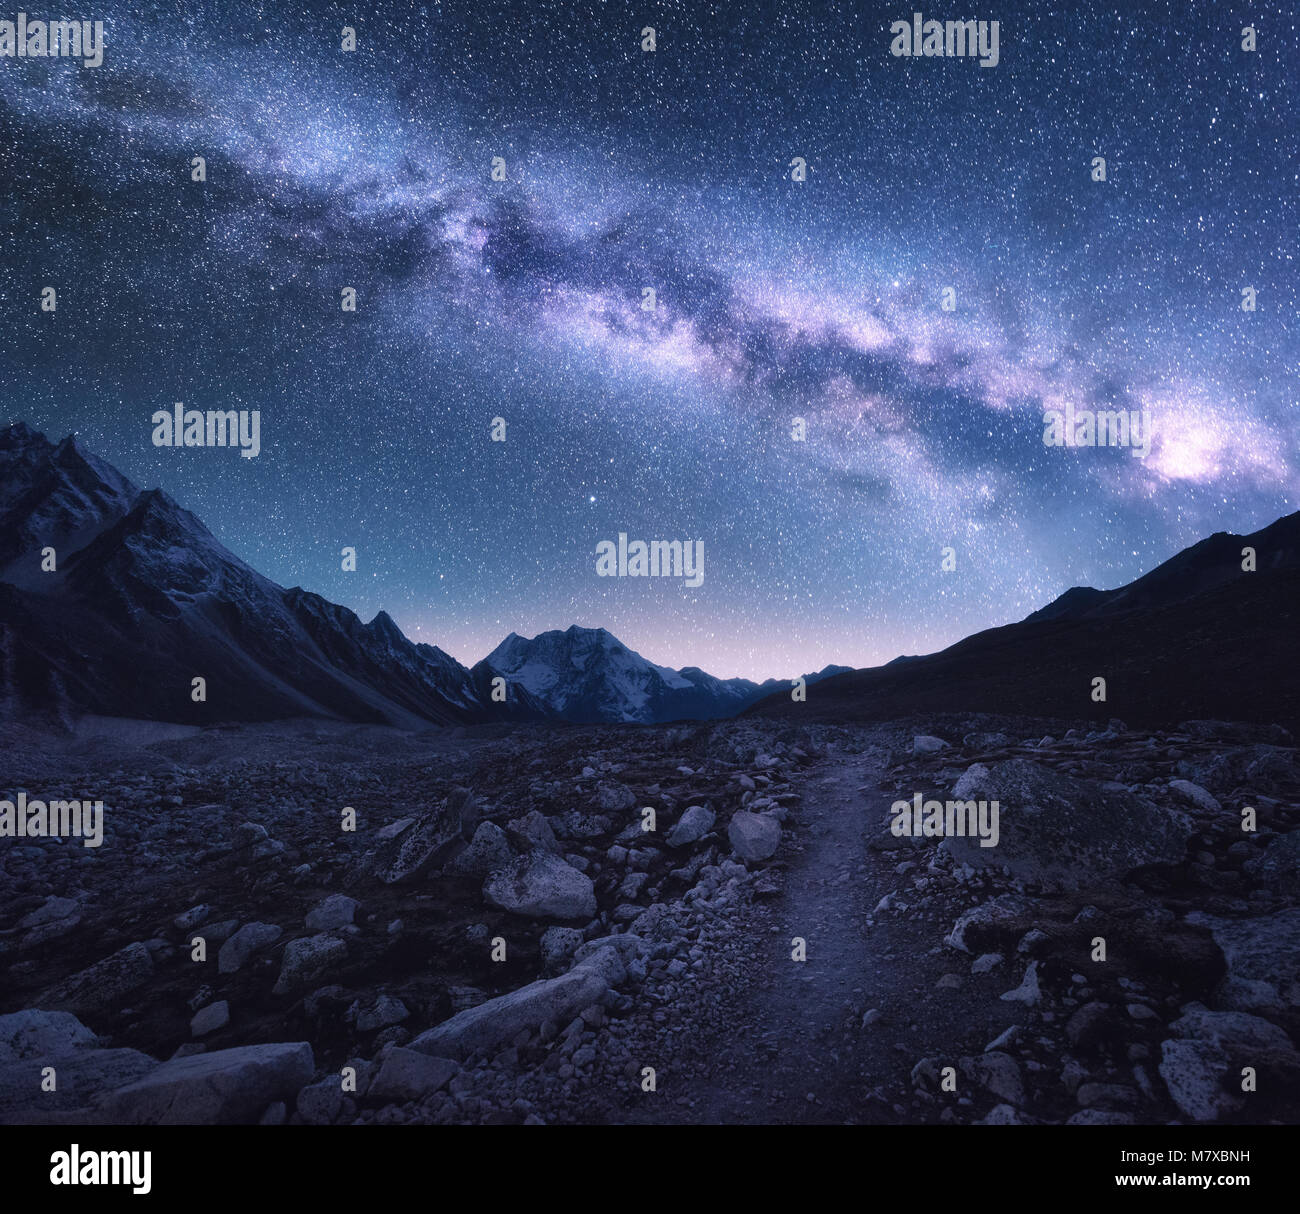 Space. Milky Way and mountains. Fantastic view with mountains and starry sky at night in Nepal. Trail through mountain valley and sky with stars. Hima Stock Photo